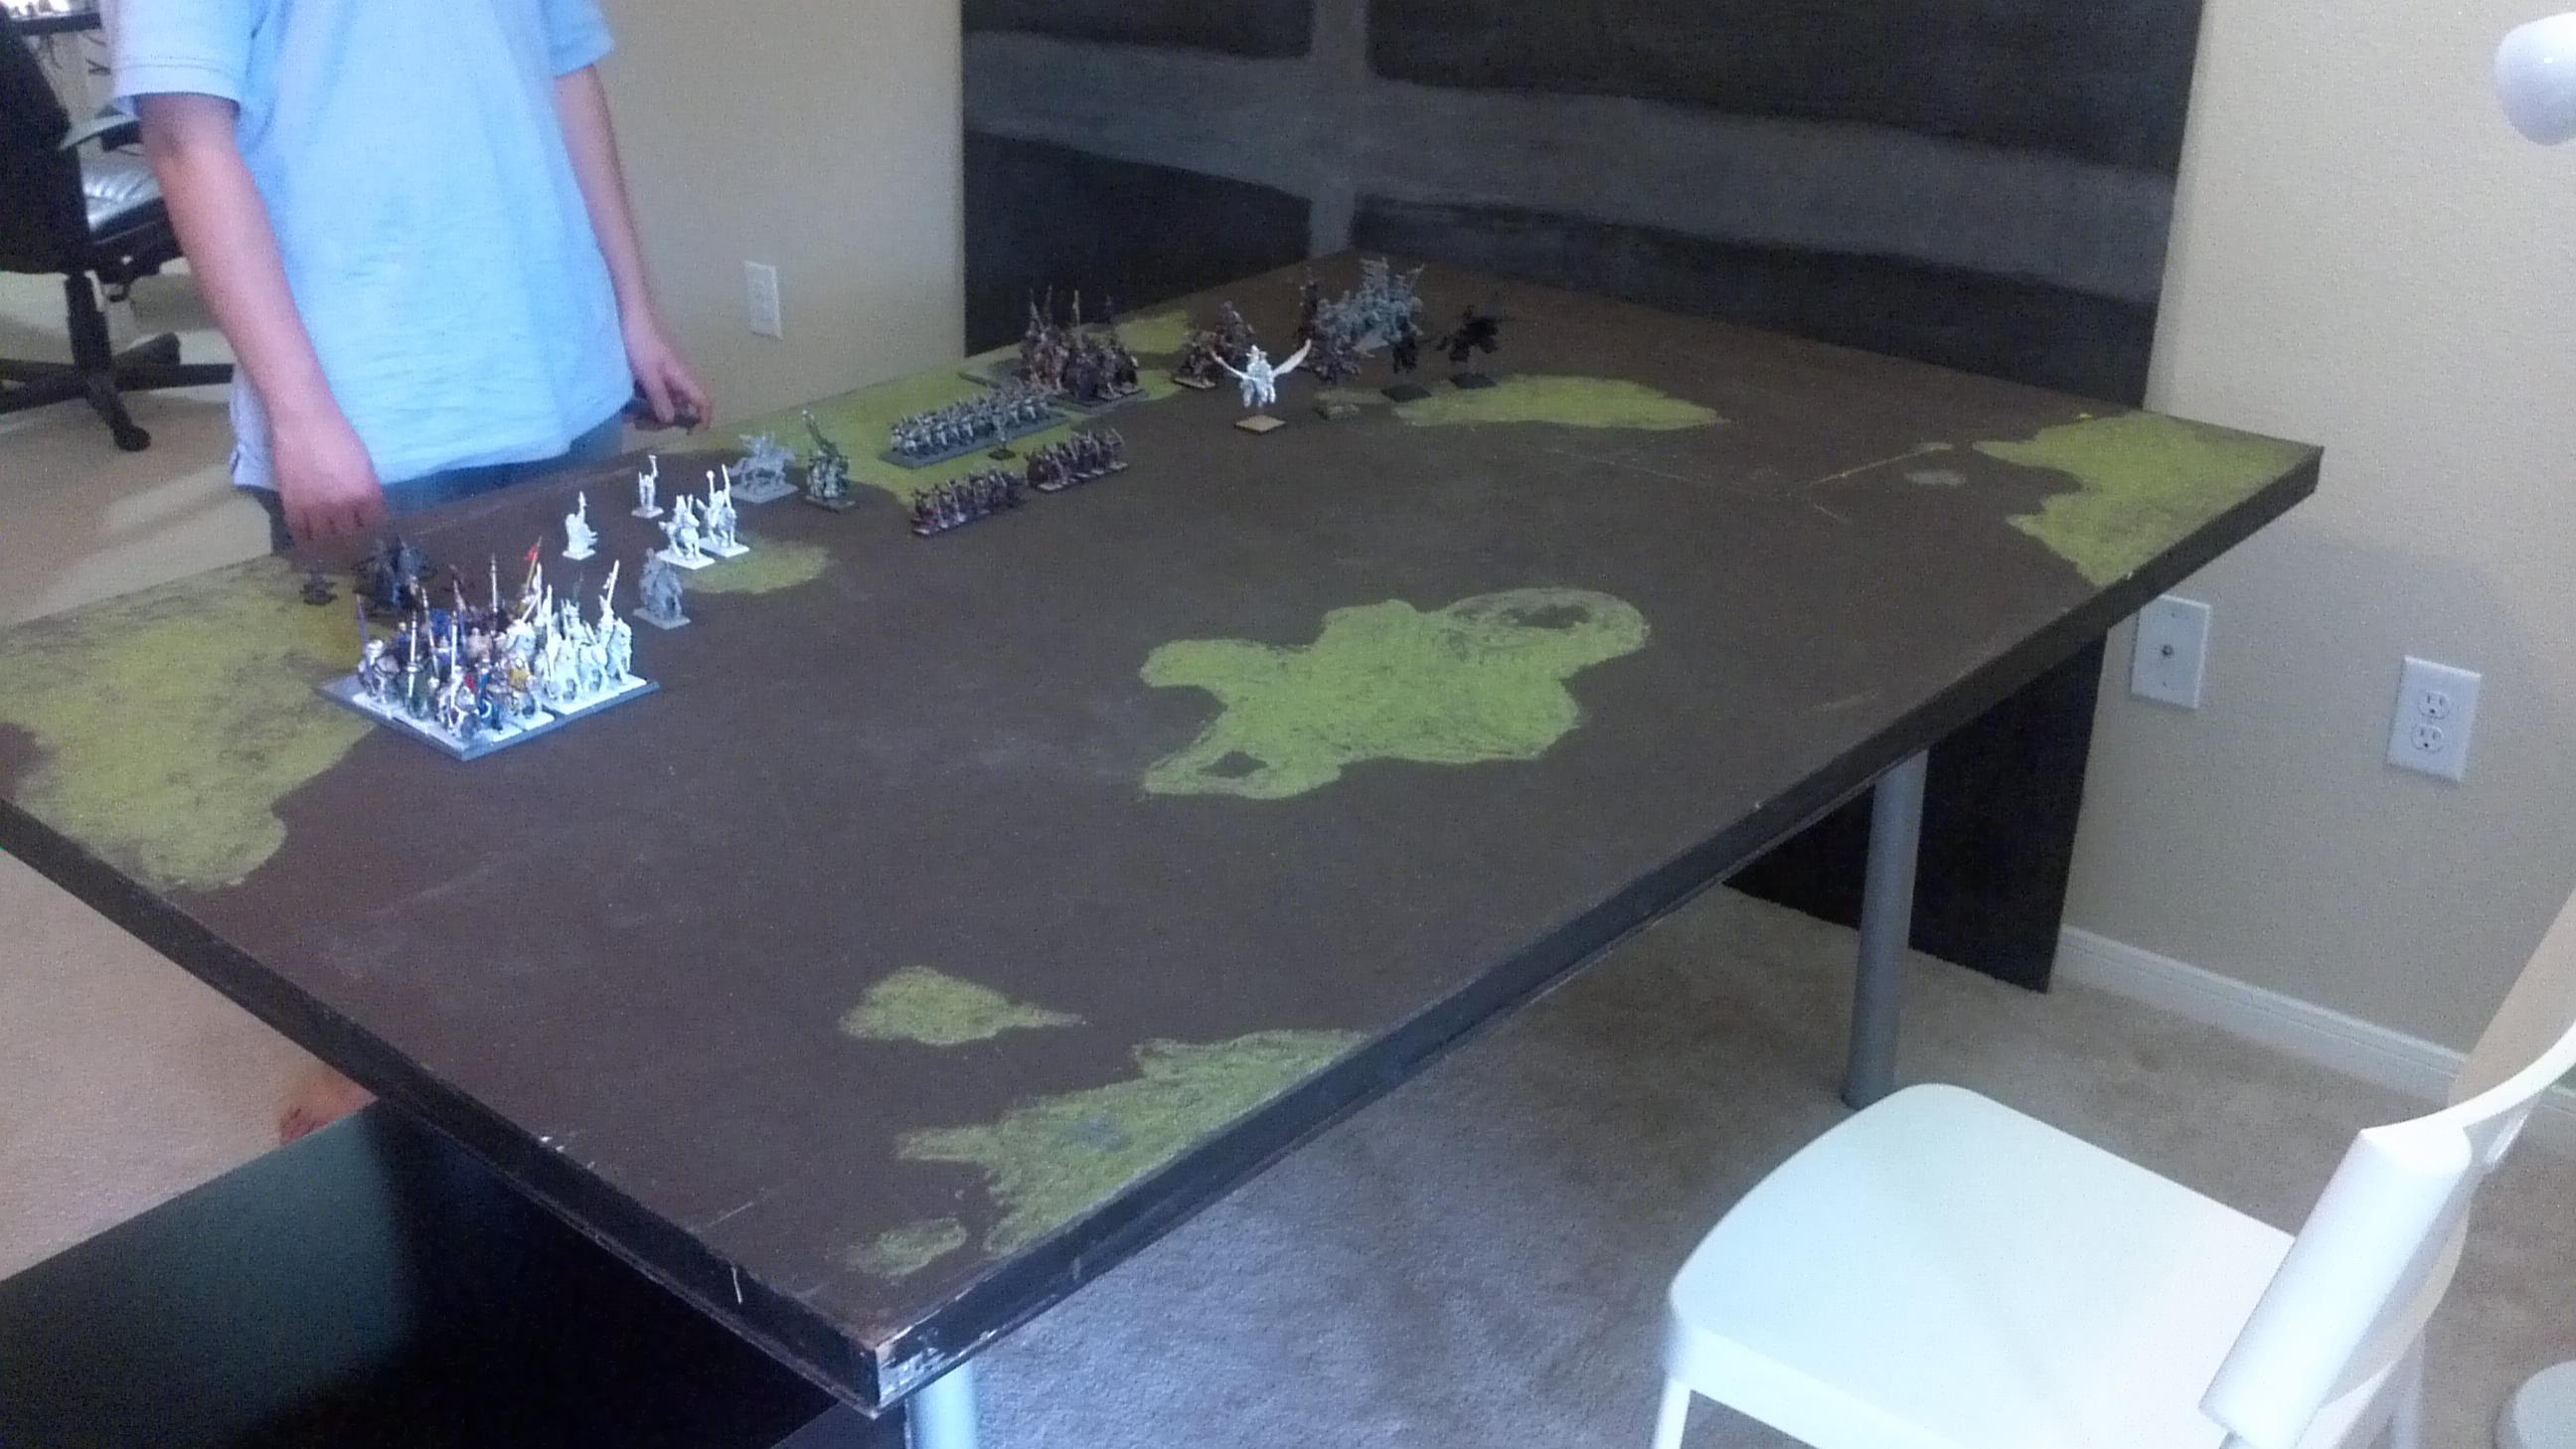 Home table acquired. Time to get some terrains